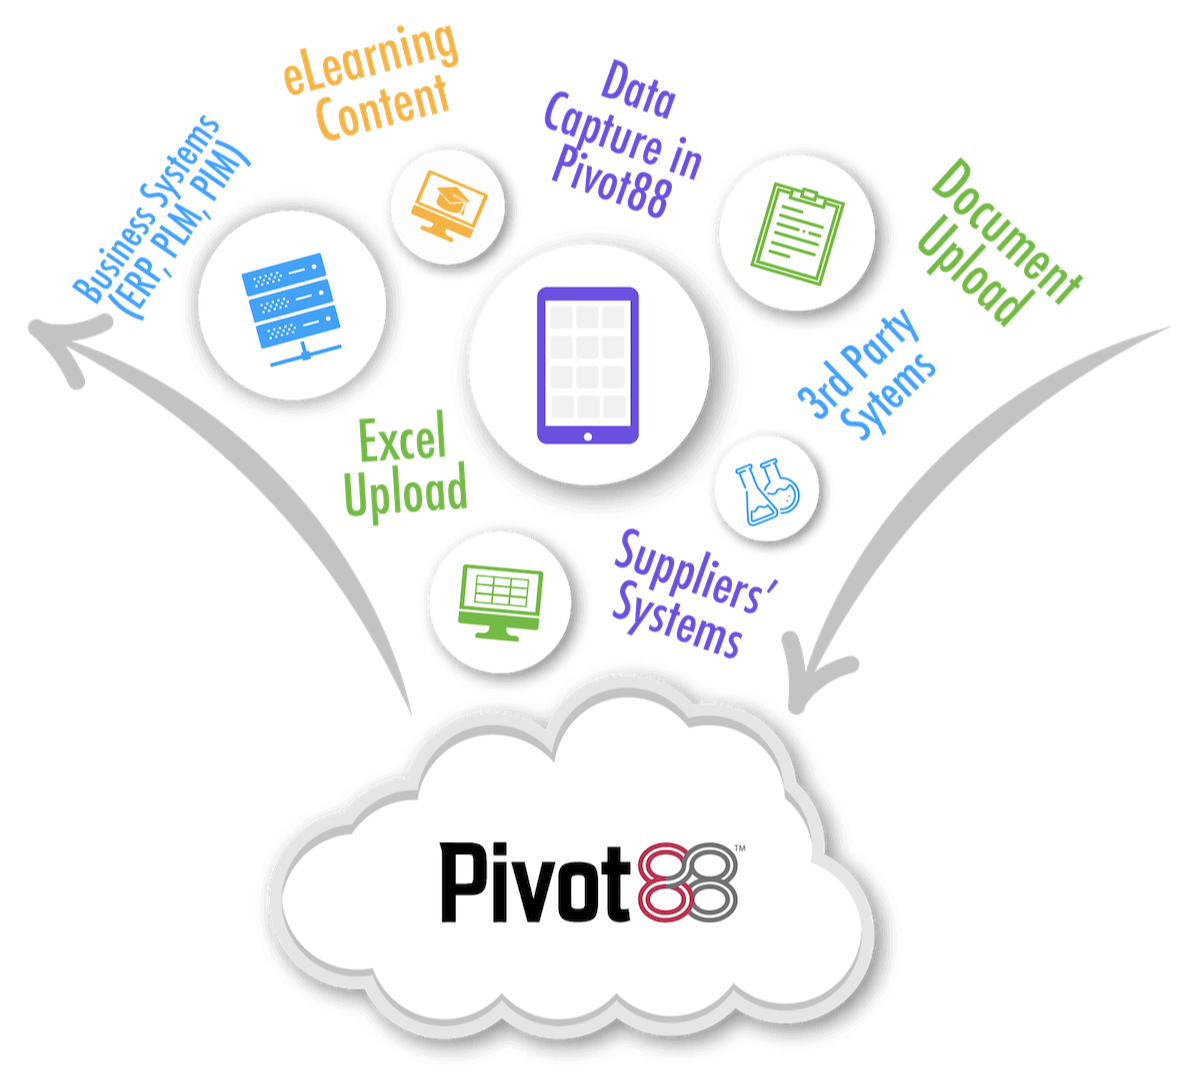 Pivot88 connecting systems